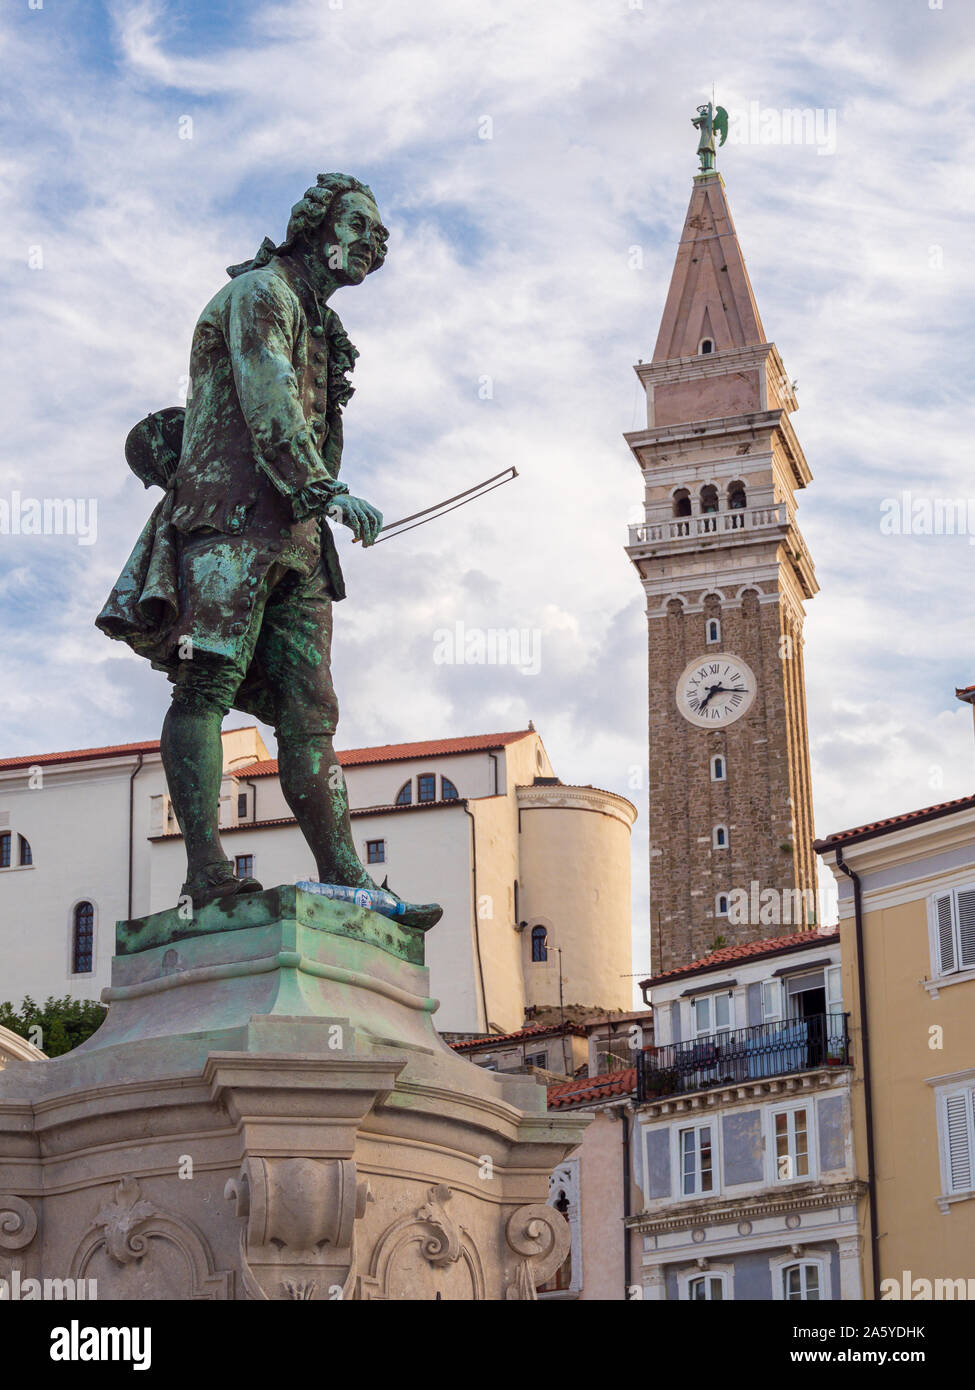 Tartini Statue with Bell Tower in background Piran Slovenia Stock Photo